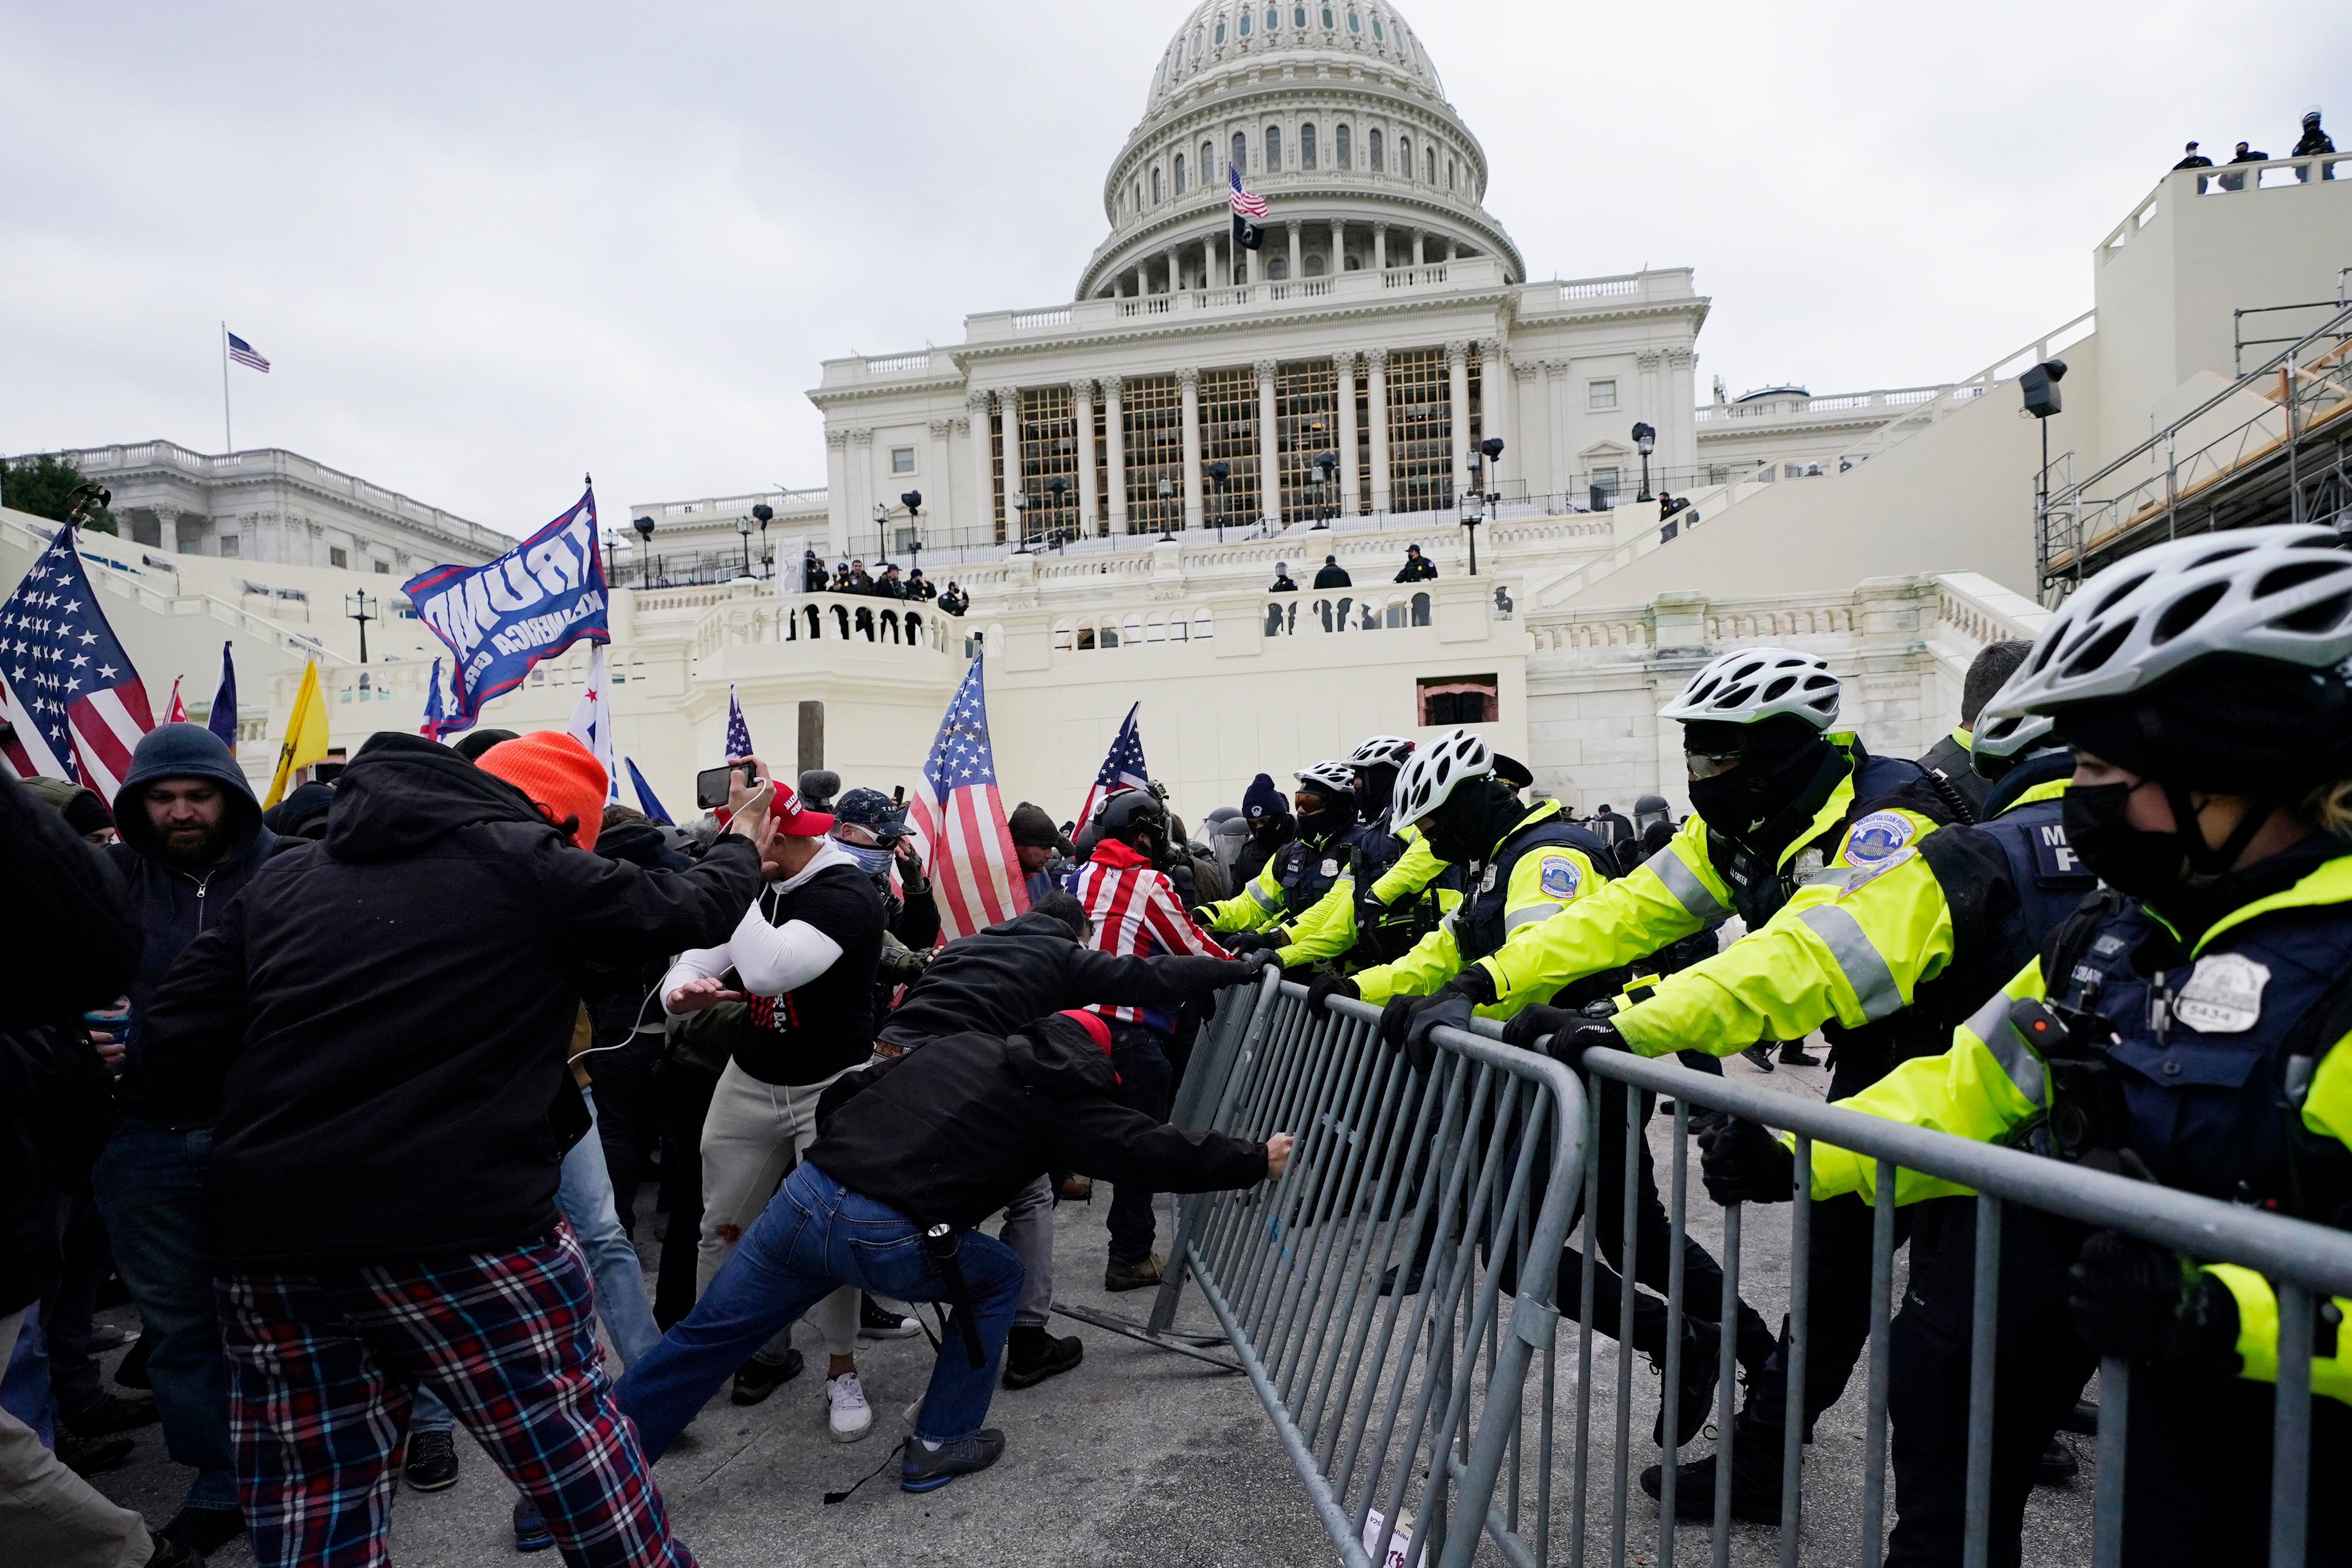 Rioters loyal to President Donald Trump rally at the US Capitol in Washington on 6 January 2021